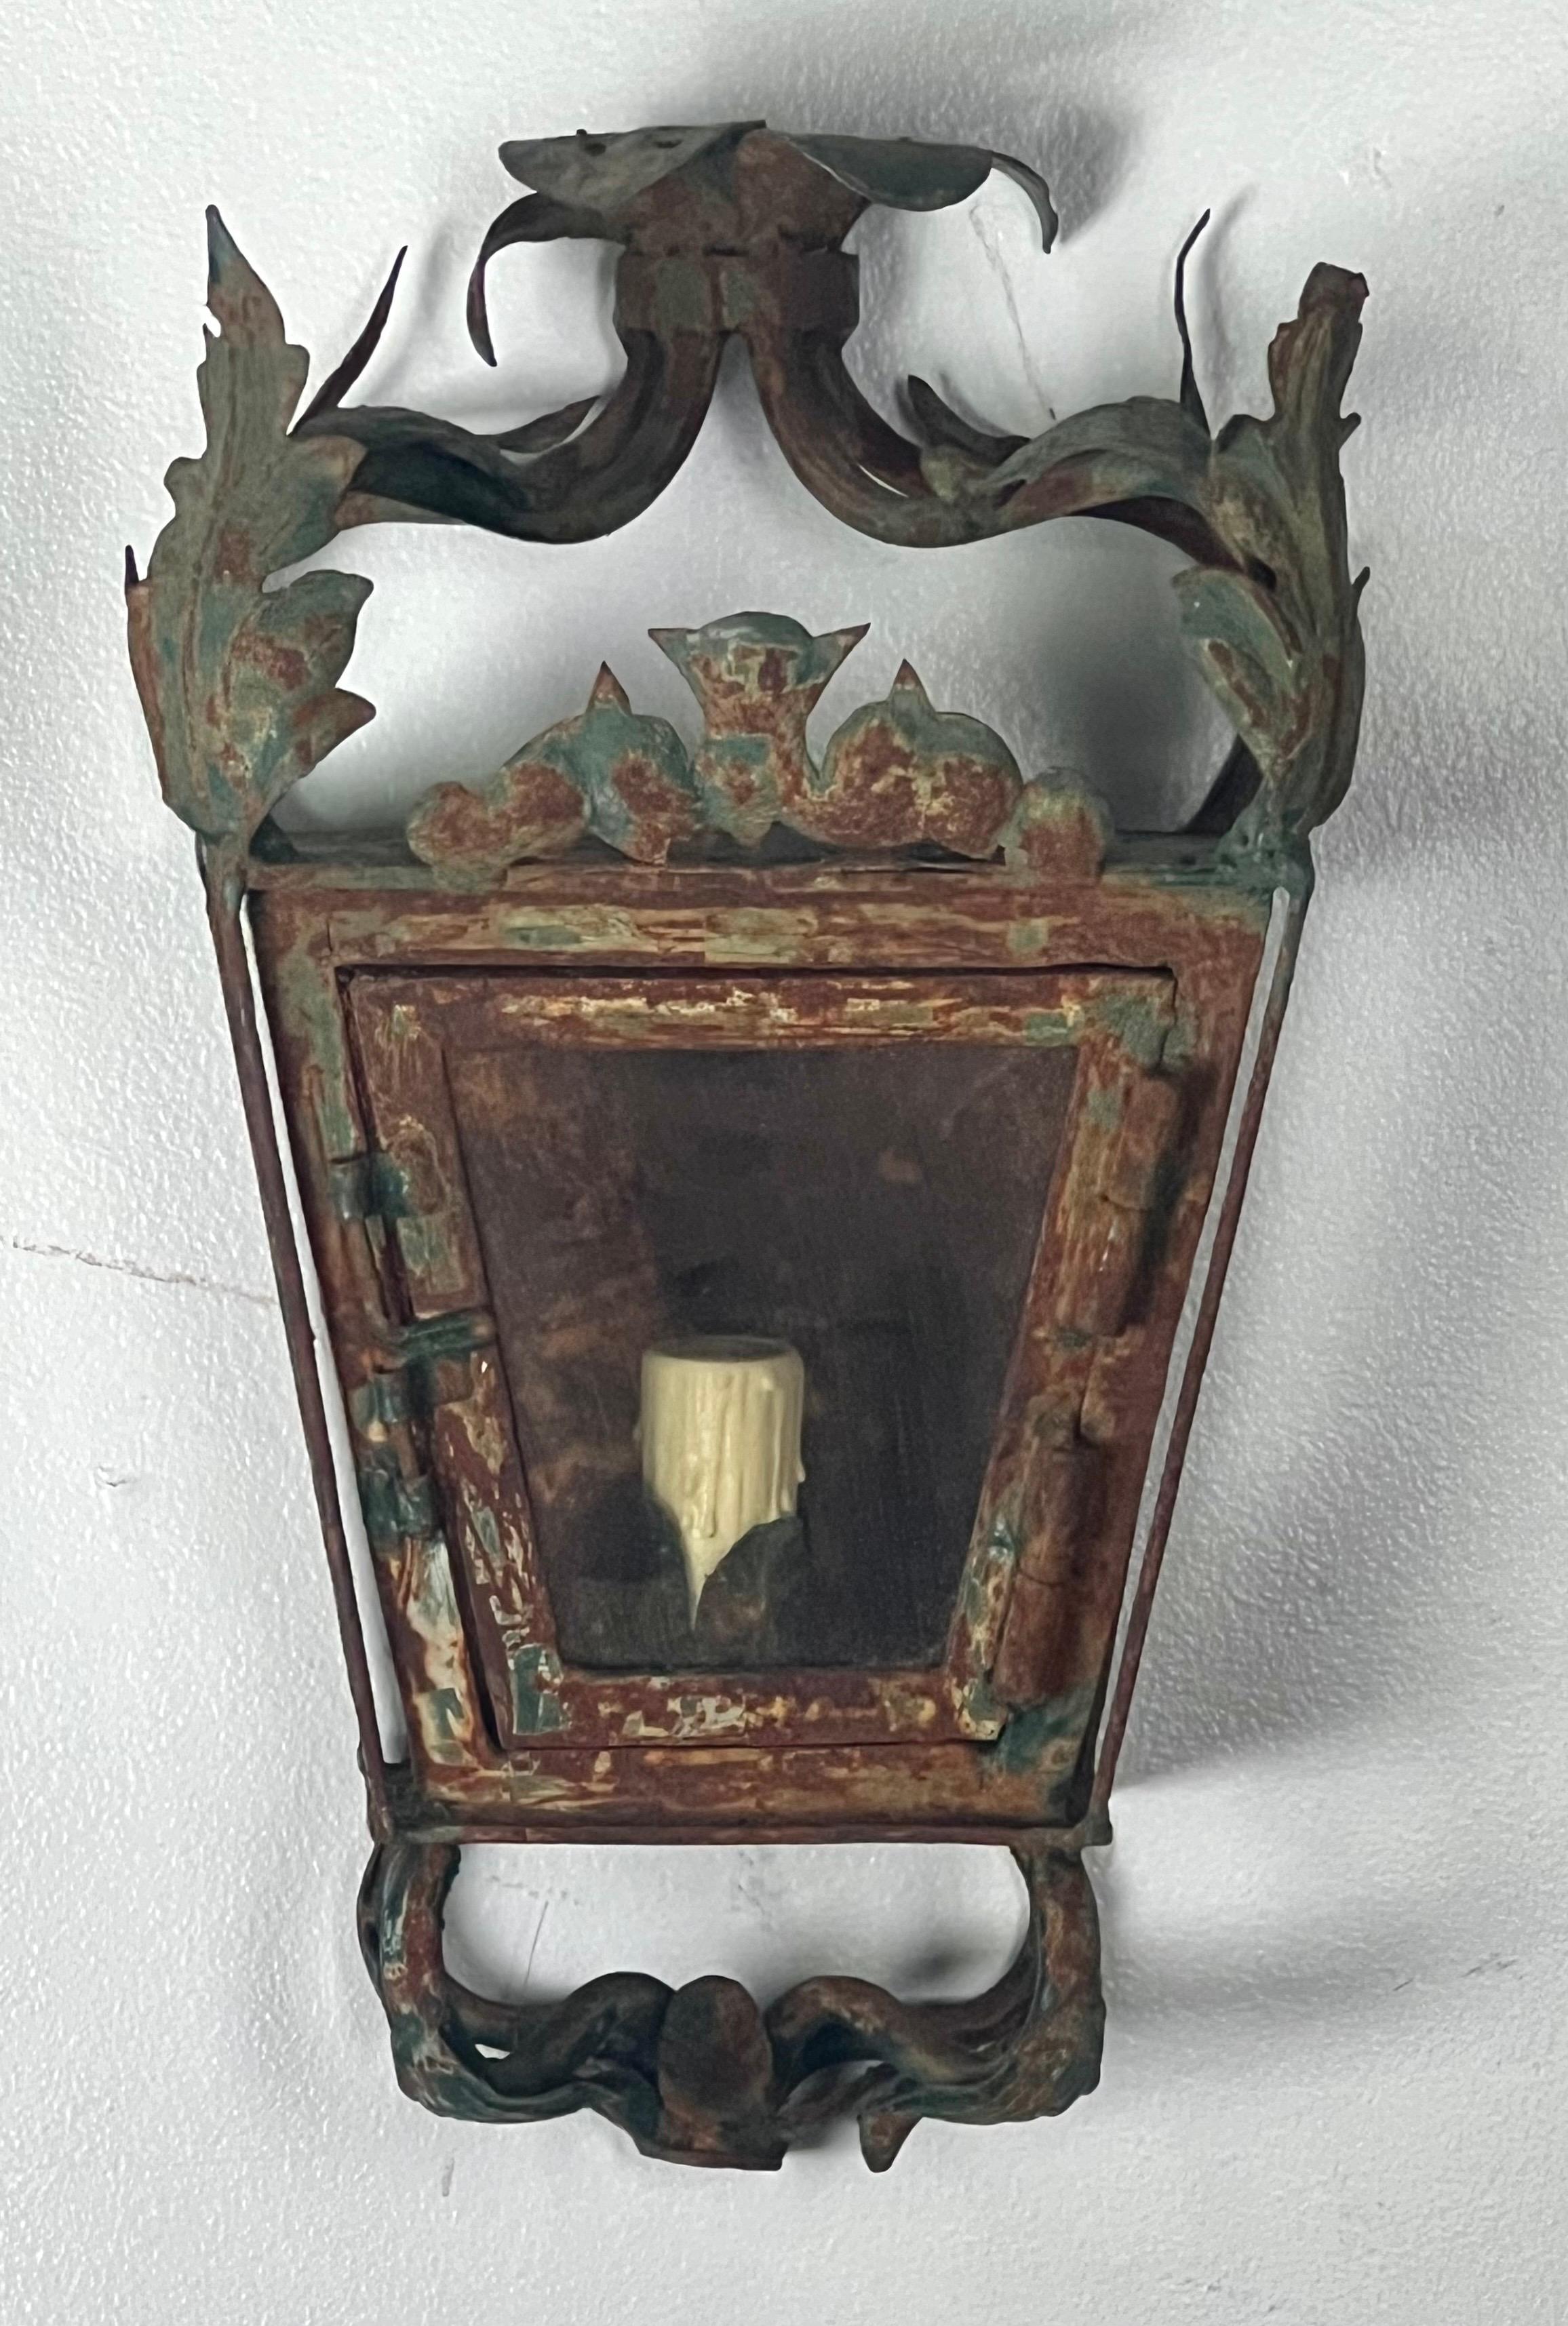 A set of four wrought iron vintage wall lanterns with a distinctly ornate design, featuring floral or foliate scrollwork.  They have been beautifully weathered,  The frames are made of wrought iron with a green patina and remnants of a rust finish. 